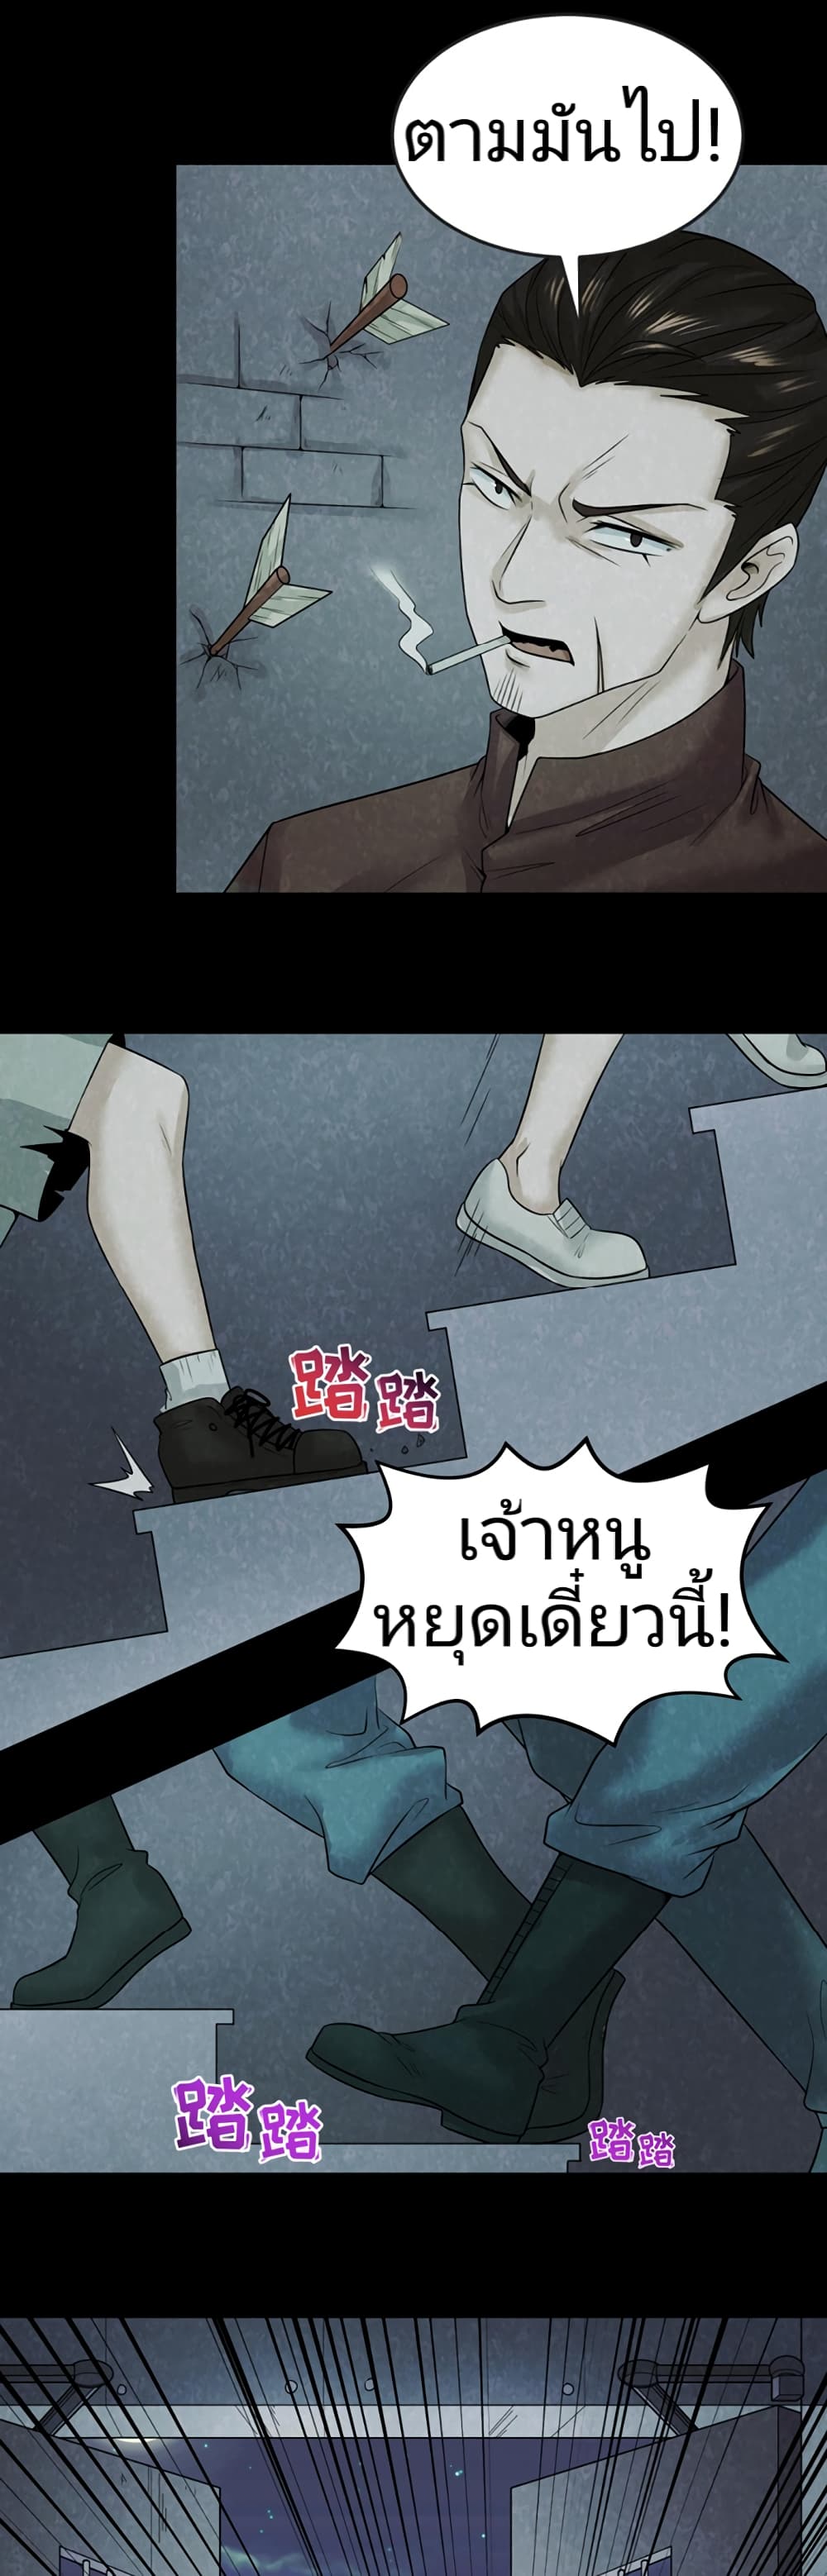 The Age of Ghost Spirits à¸à¸­à¸à¸à¸µà¹ 33 (8)